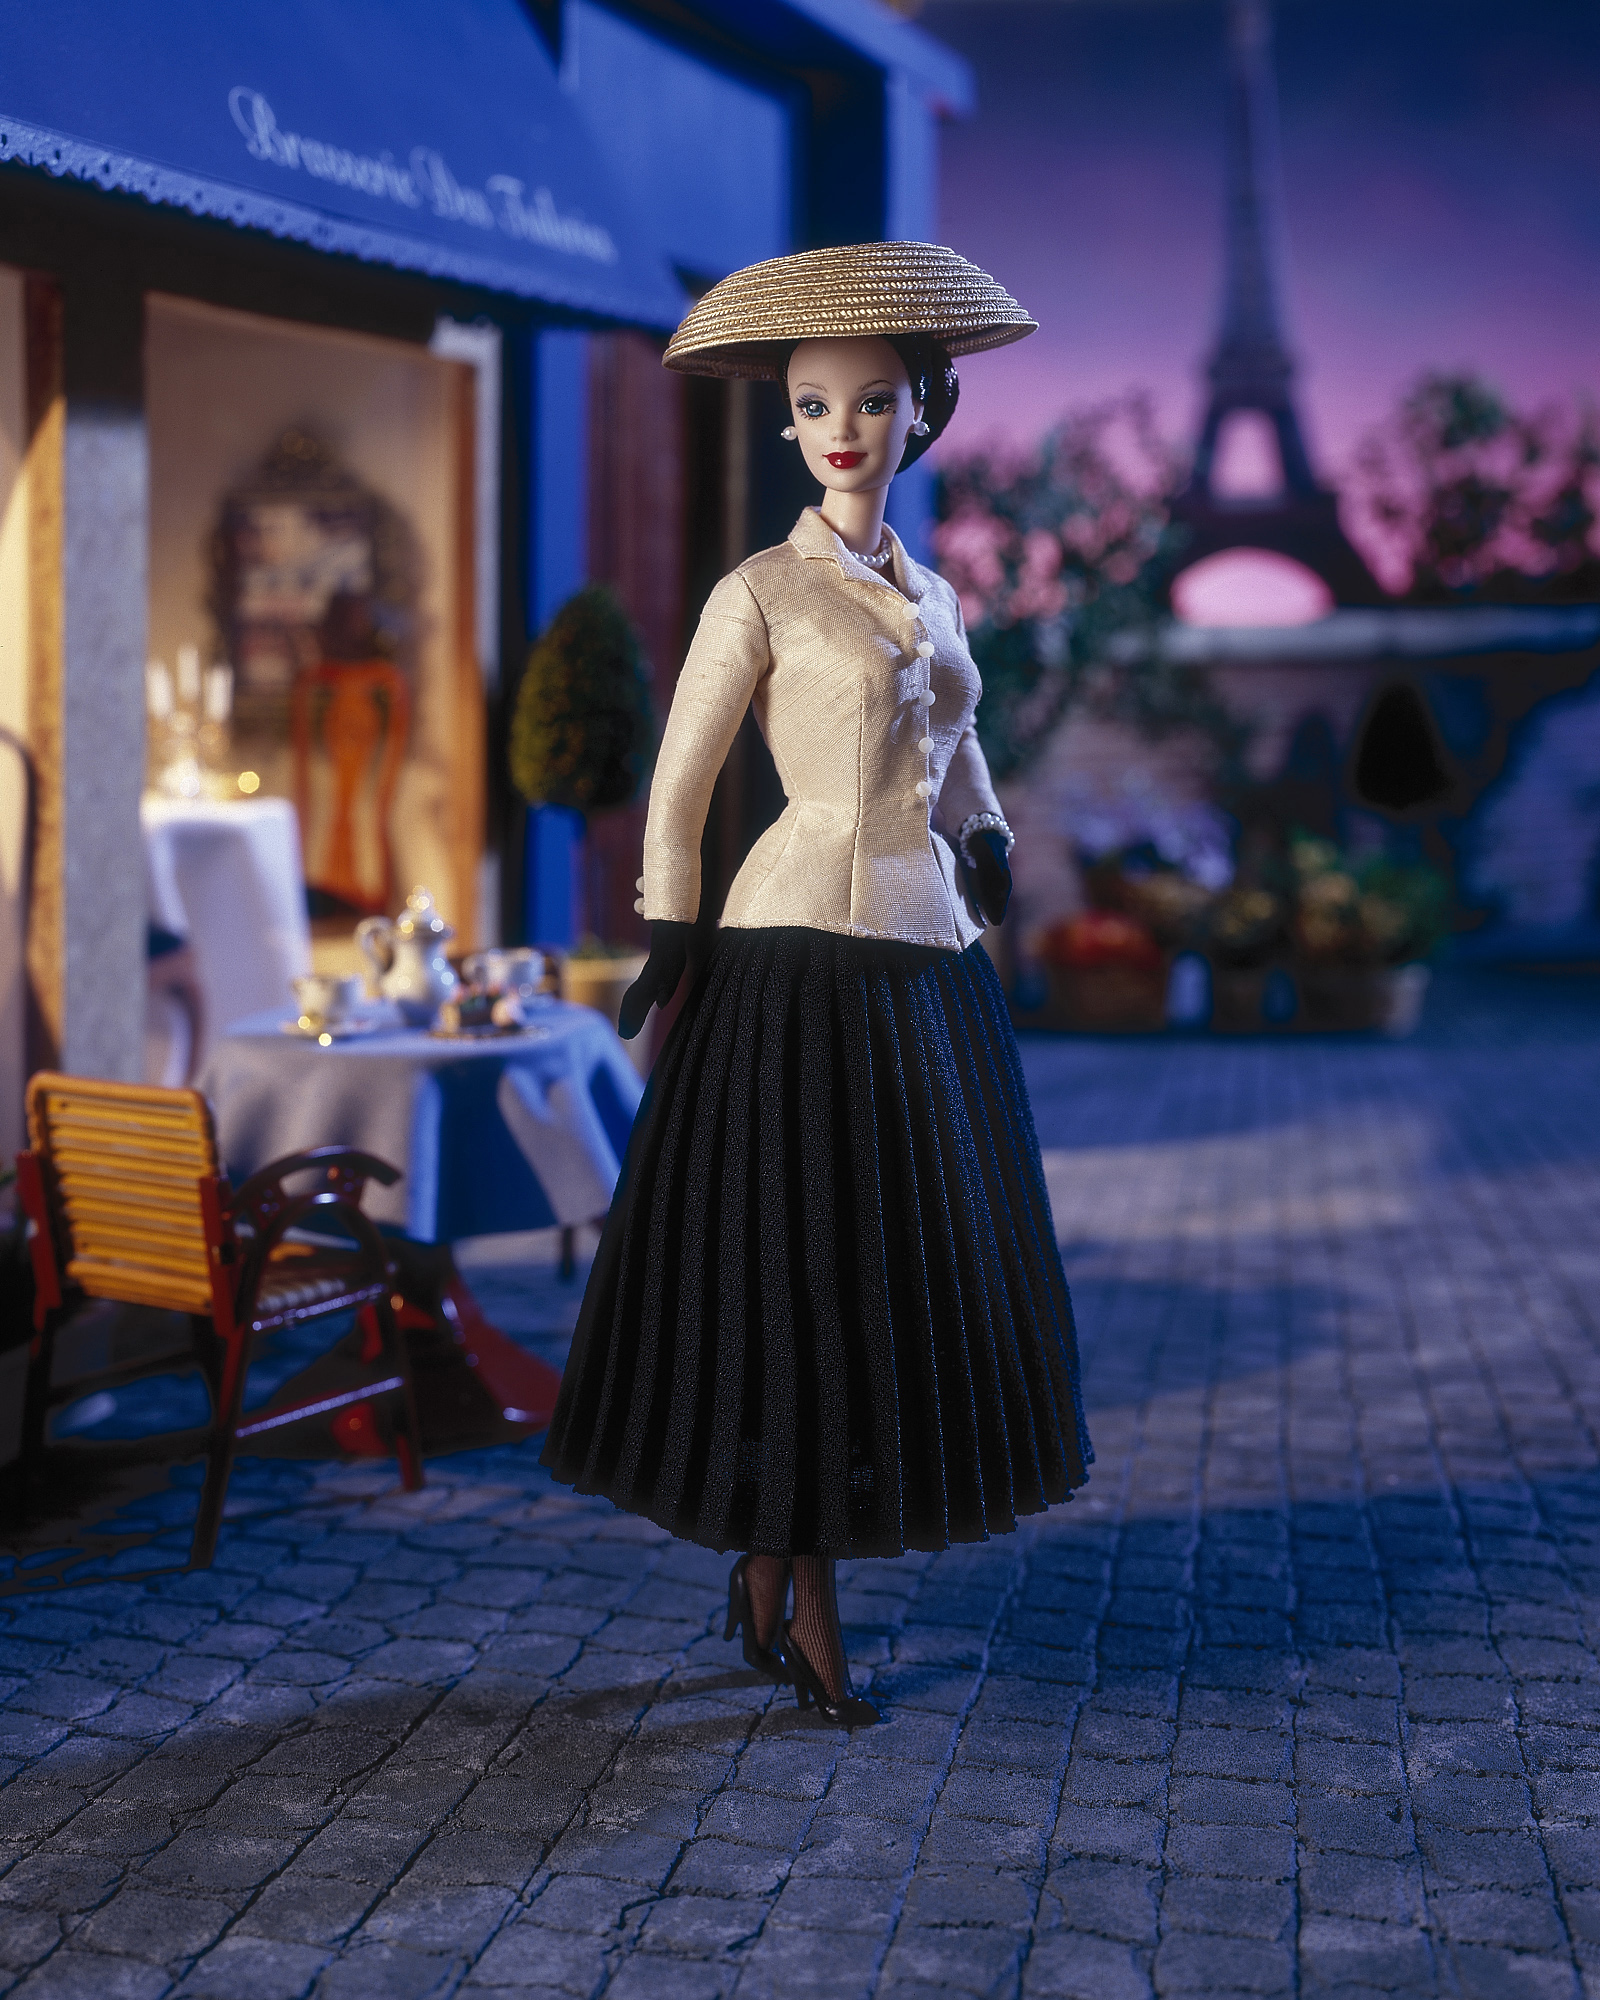 The Christian Dior Barbie Doll, released in 1997.